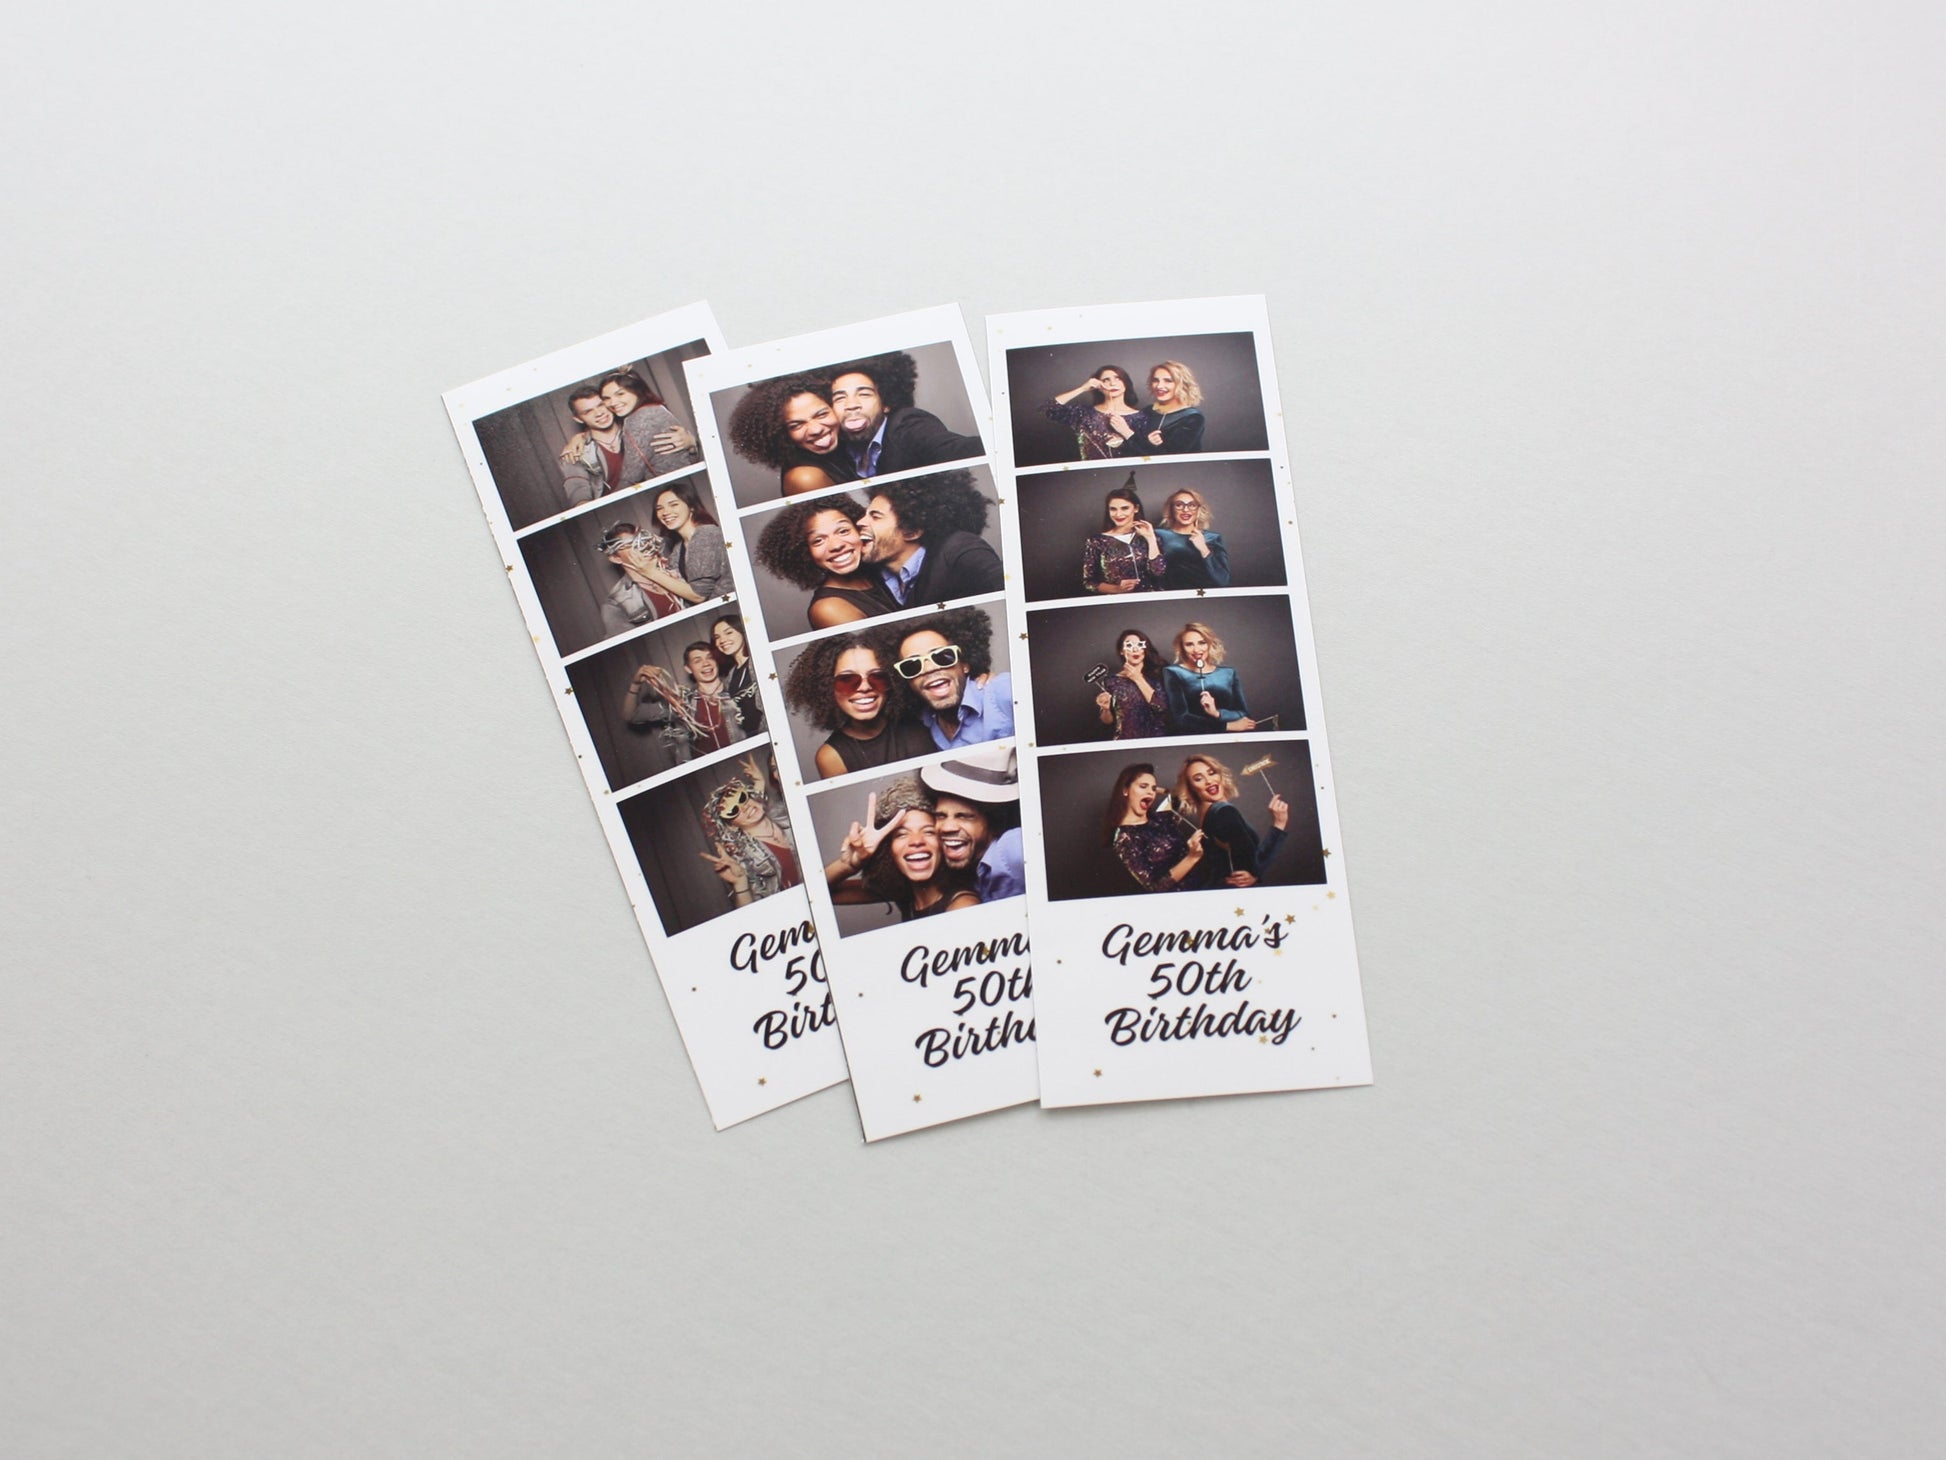 Photo Booth Strip Floating Frame - 2 Photo Booth Strips - Floating Photo Frame showing the entire Photo strip, including border. - PhotoFramesandMore - Wooden Picture Frames